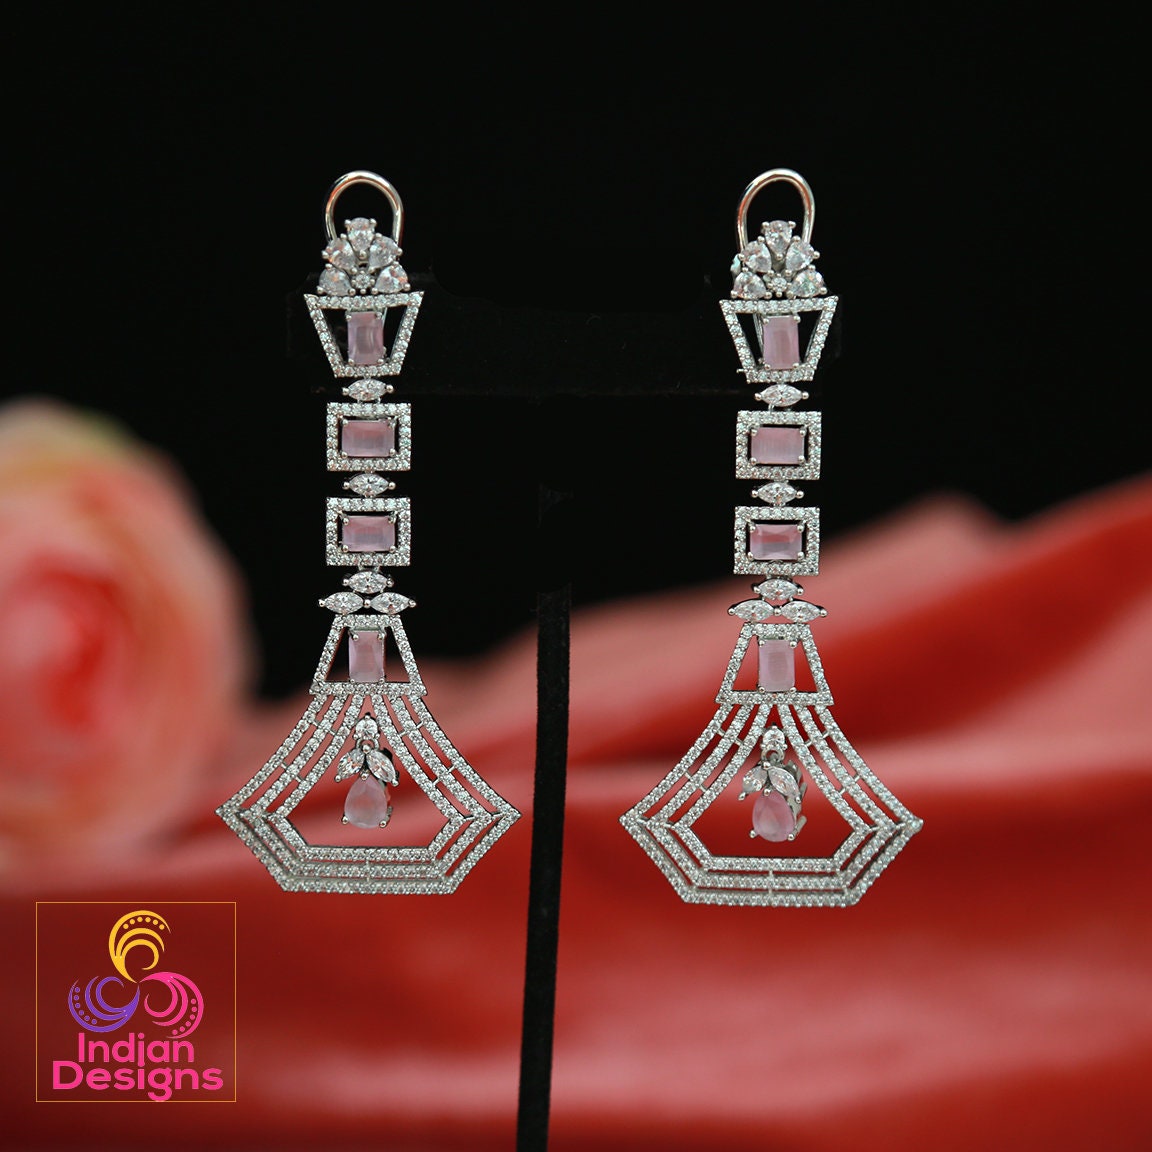 7 Diamond Earring Design To Elevate Your Style | VBJ